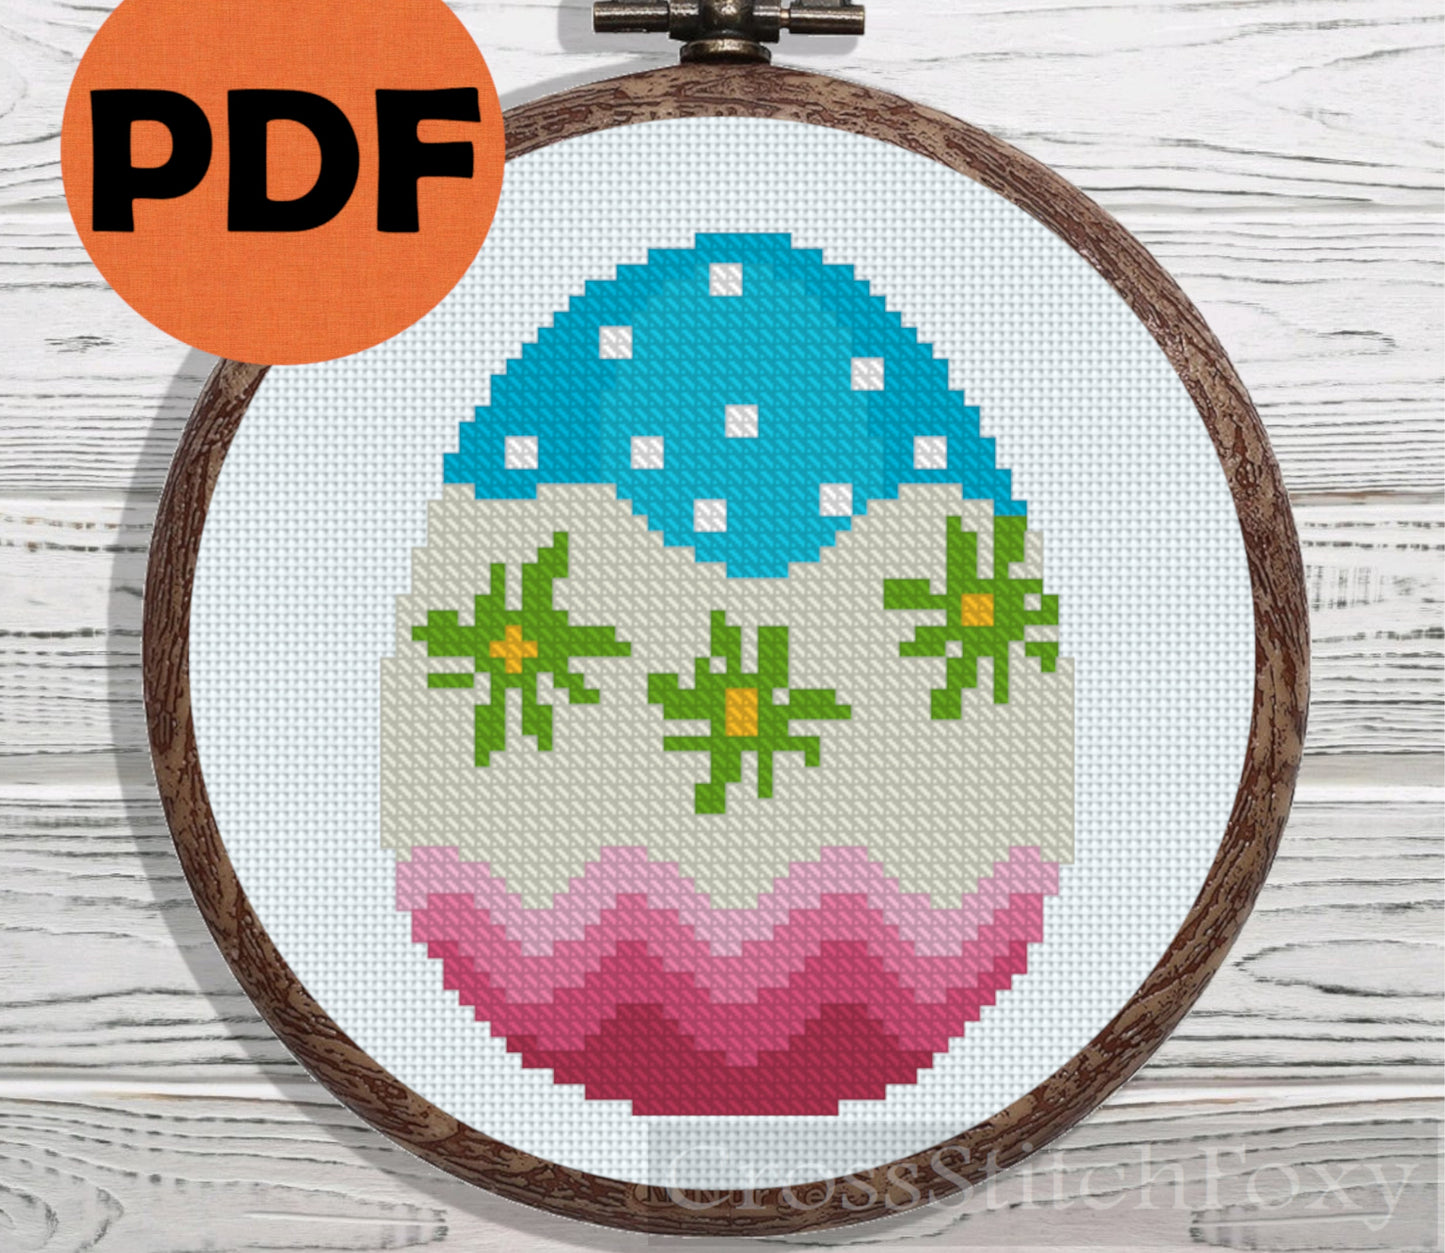 Floral Easter Egg cross stitch pattern